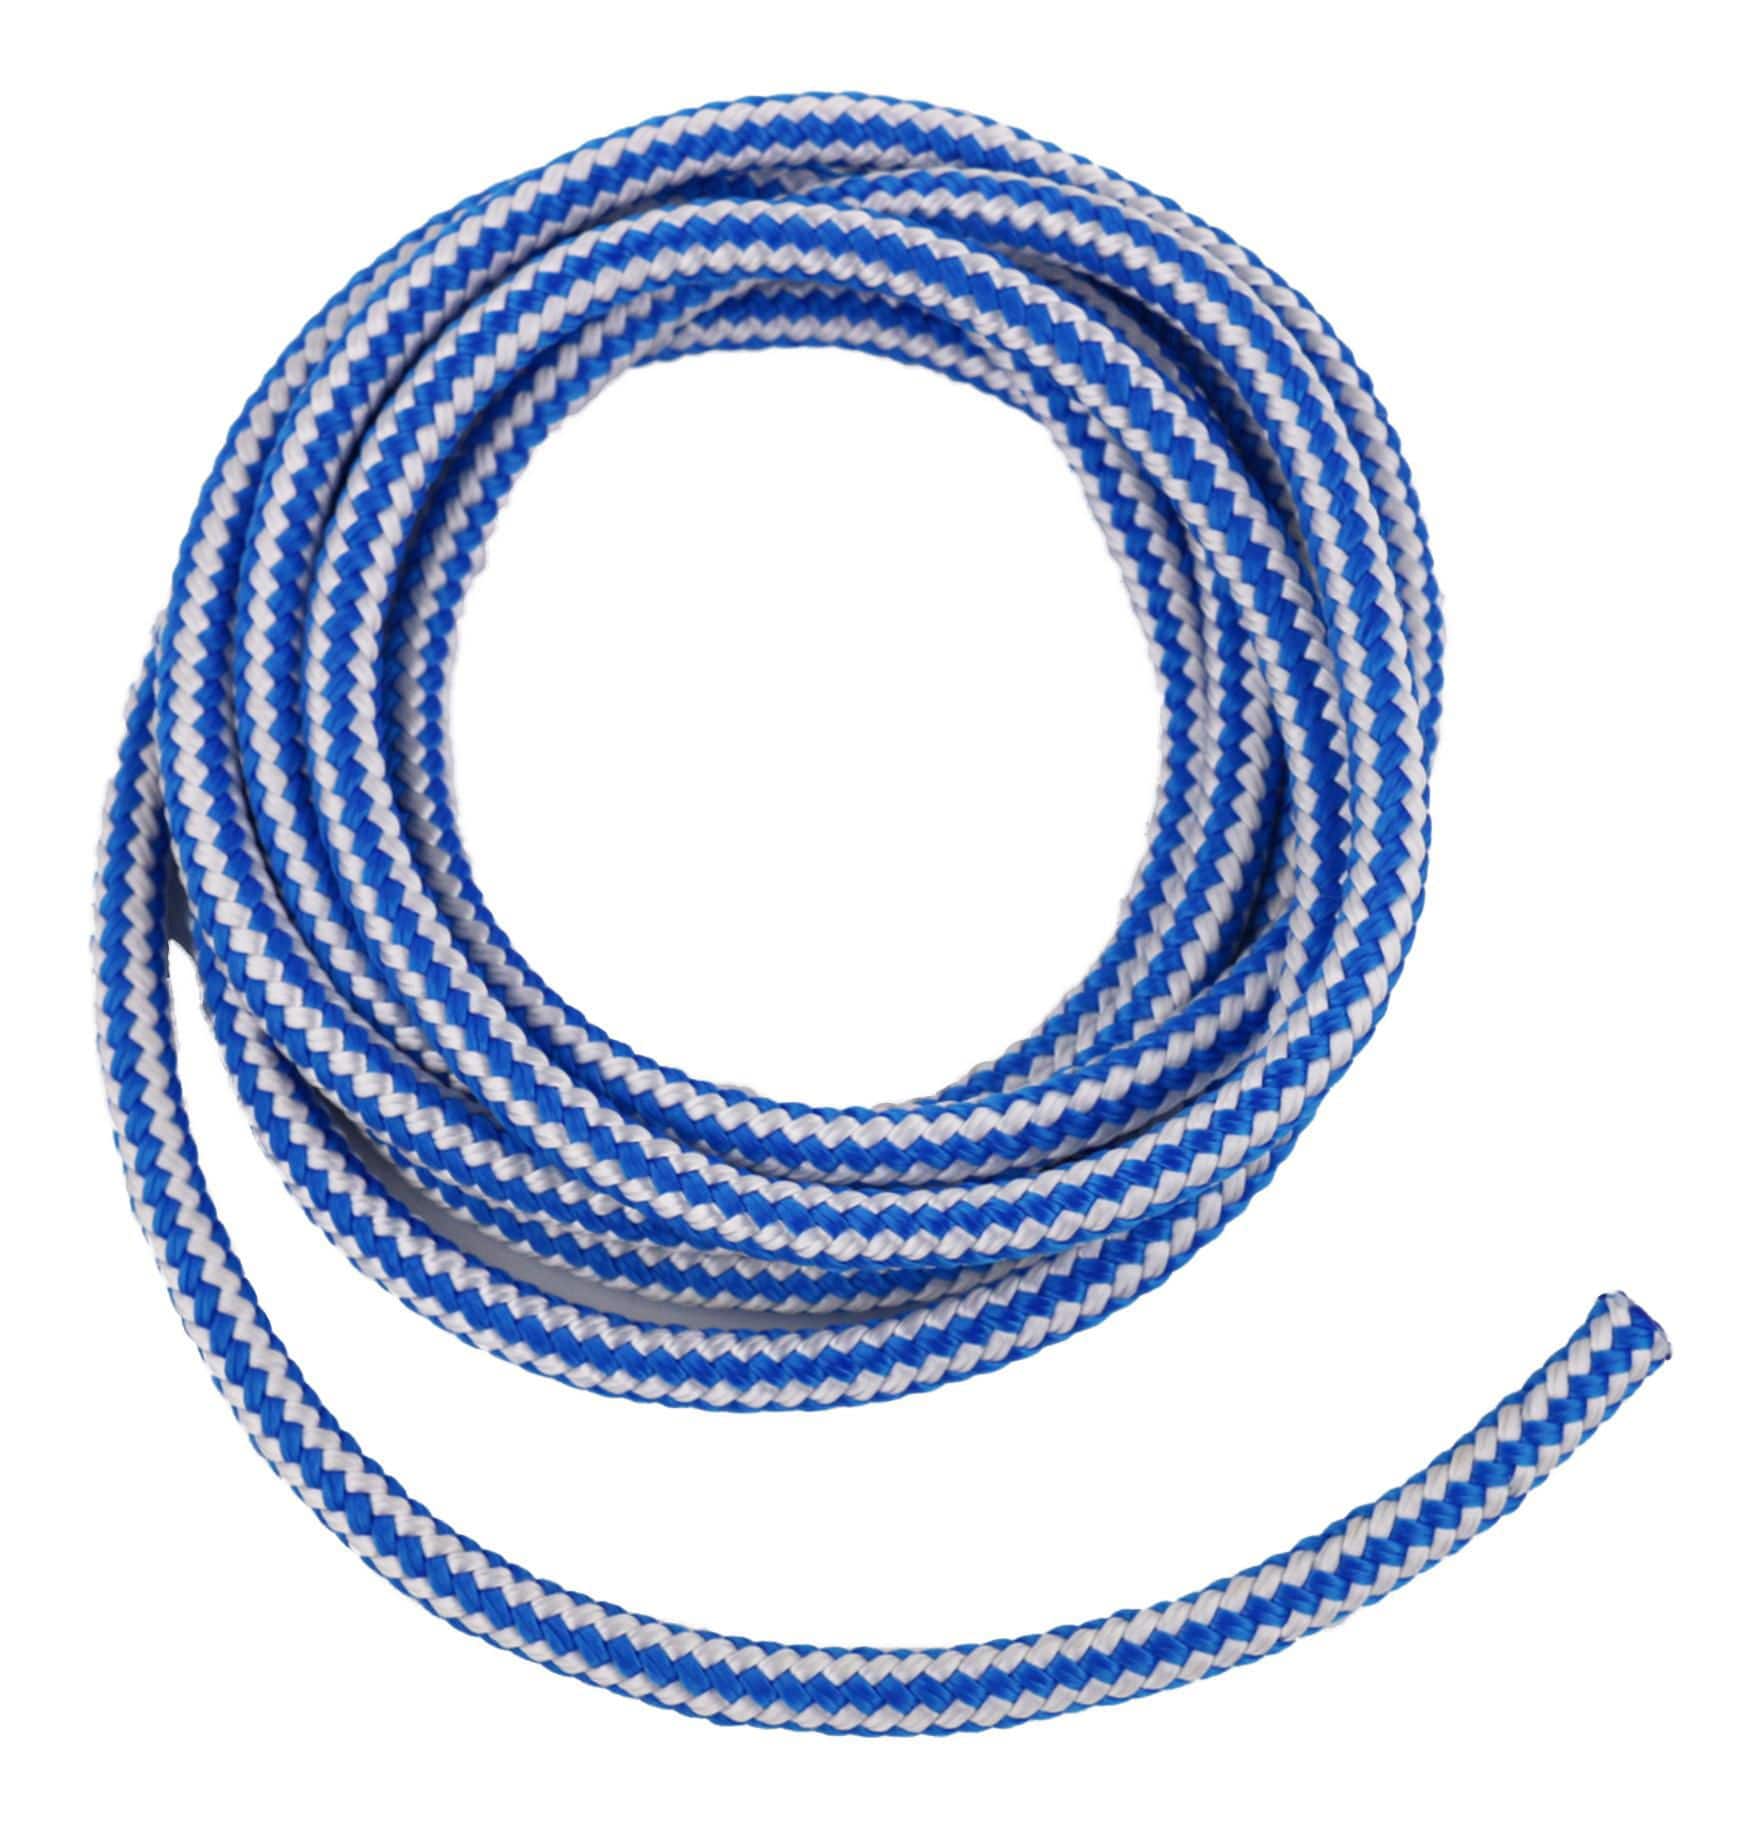  Yellow Twisted Polypropylene Rope - 3/8 Floating Poly